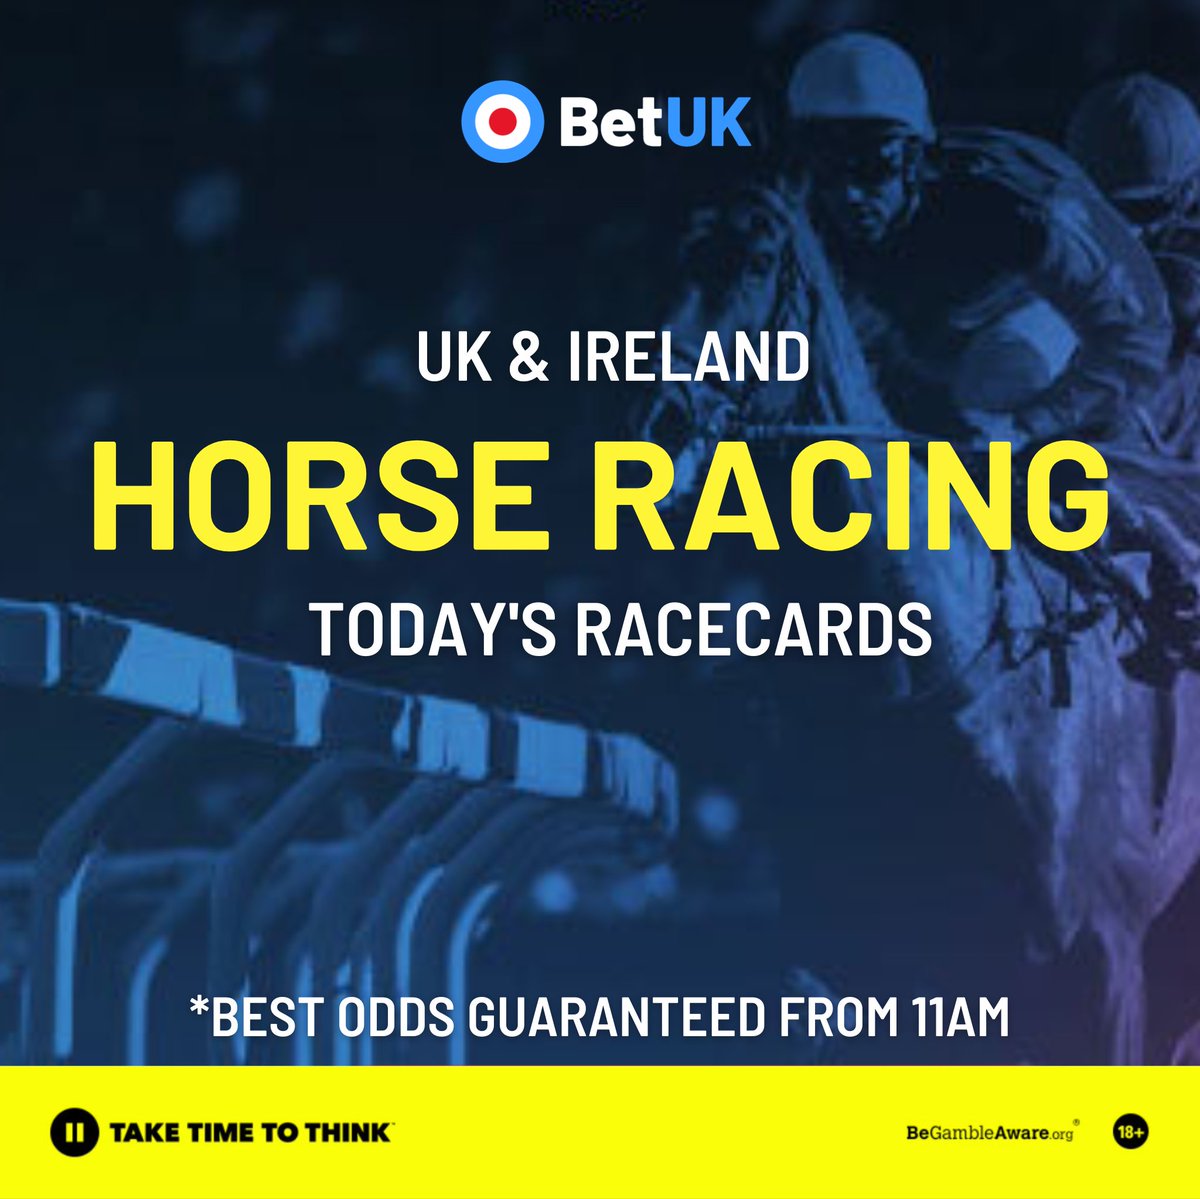 🎥 𝗙𝗥𝗘𝗘 𝗟𝗜𝗩𝗘 𝗦𝗧𝗥𝗘𝗔𝗠𝗜𝗡𝗚
🤑 𝗕𝗘𝗦𝗧 𝗢𝗗𝗗𝗦 𝗚𝗨𝗔𝗥𝗔𝗡𝗧𝗘𝗘𝗗

🏇 Take a look at today's Horse Racing in the UK & Ireland!

Racecards 👉 gobetuk.co/3TUinab